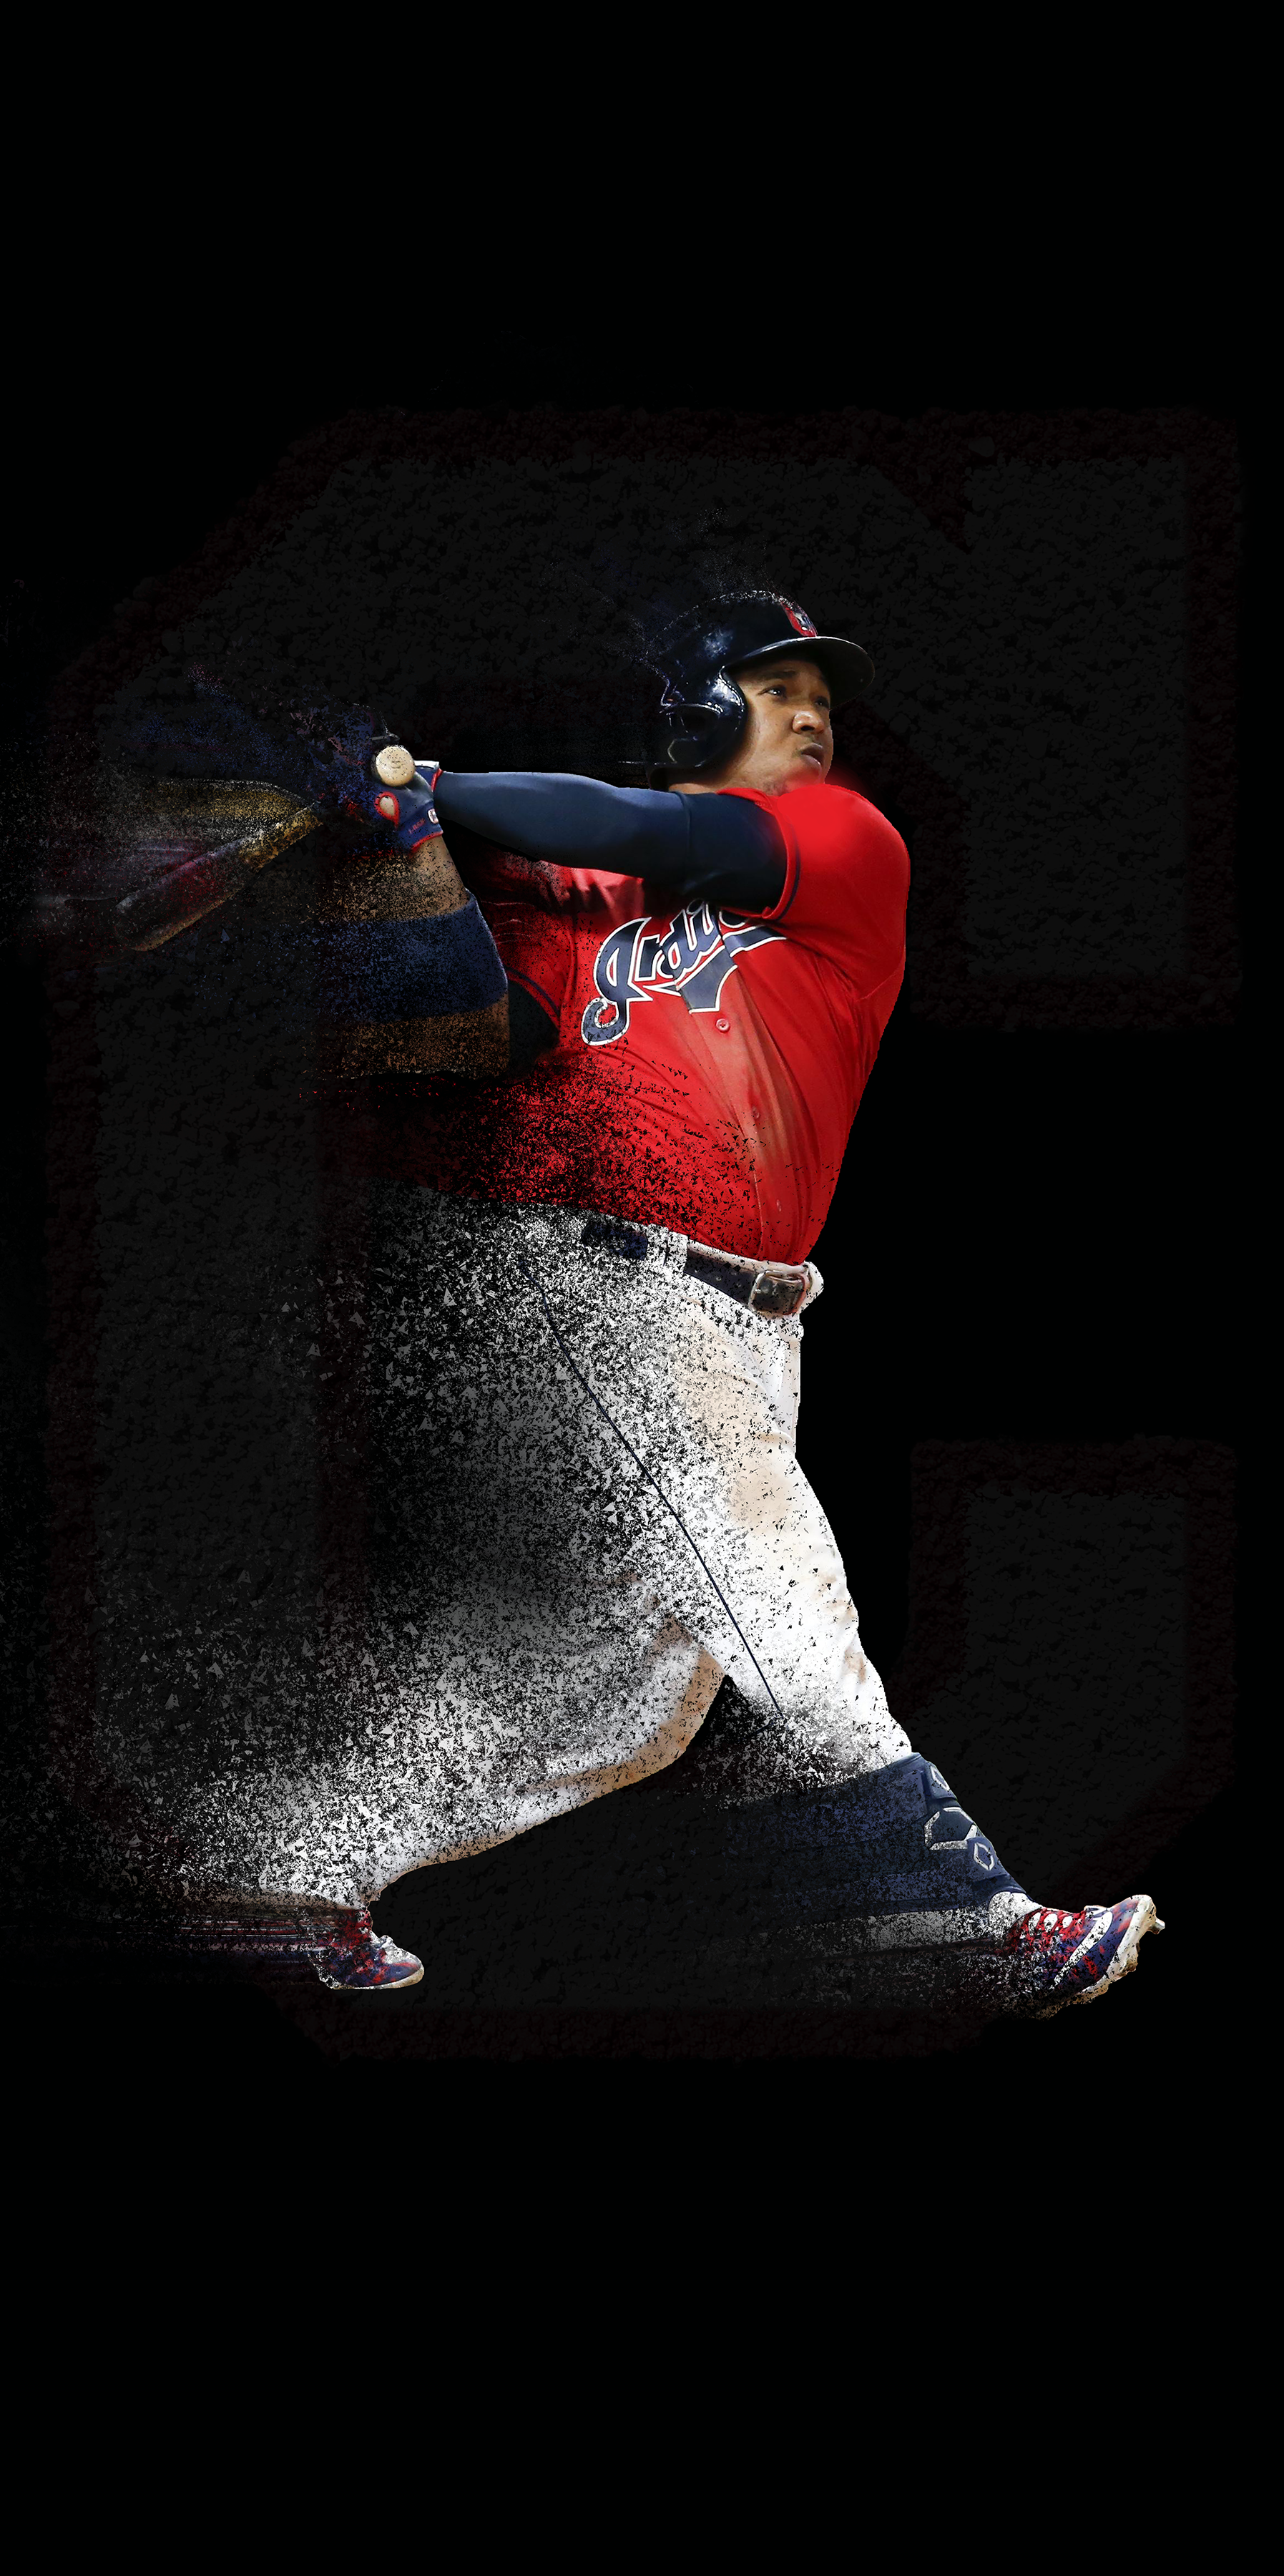 Made a Jose Ramirez phone wallpaper as a birthday present to myself. Thought the rest of this sub might enjoy it too